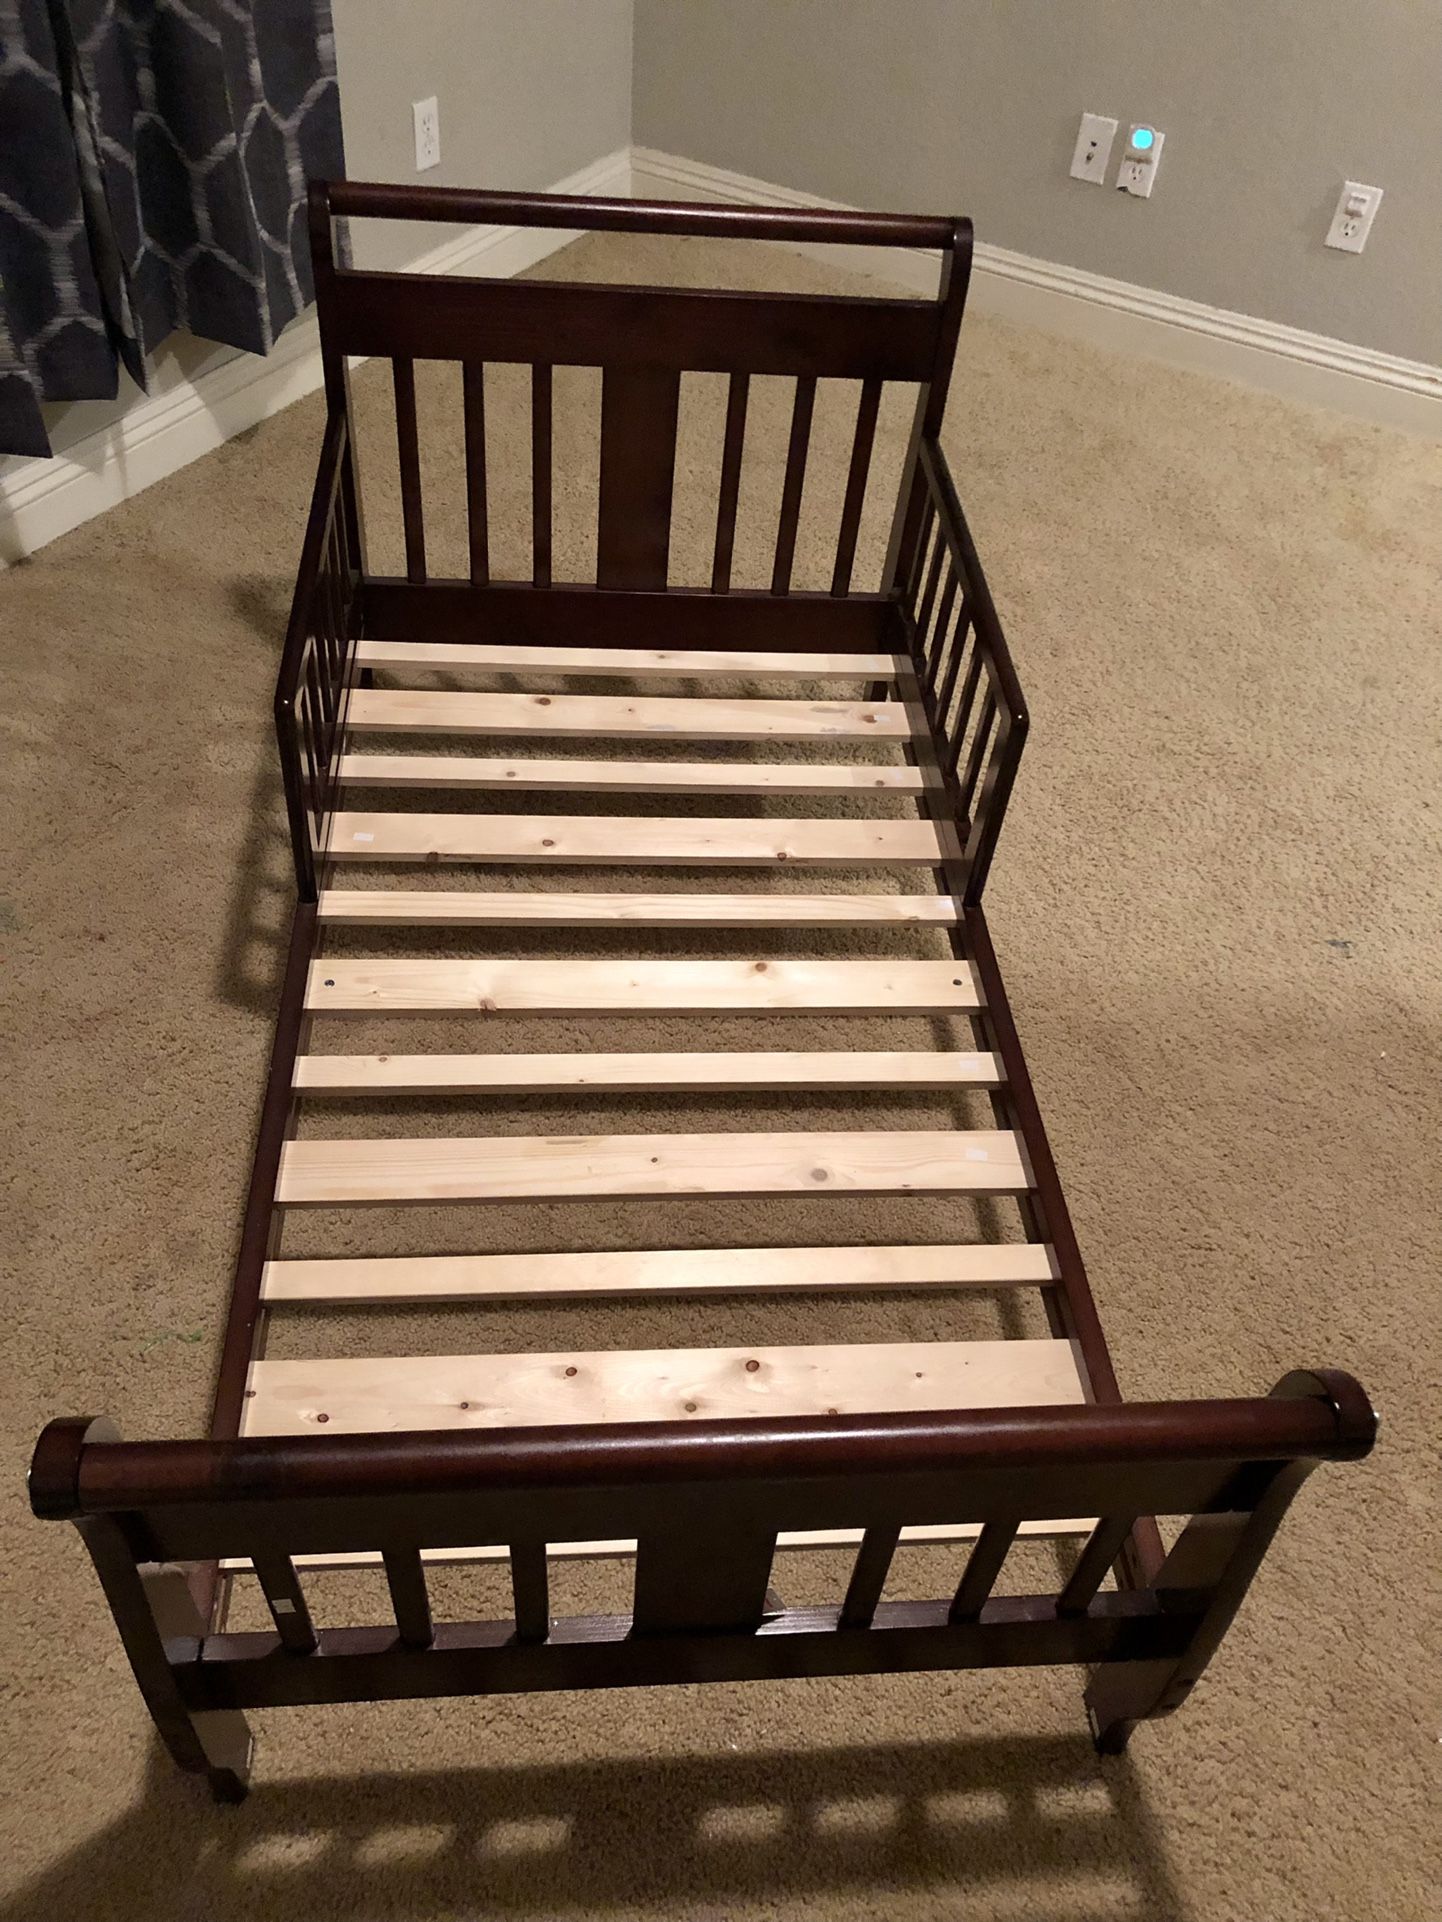 Toddler Bed - Used Once!